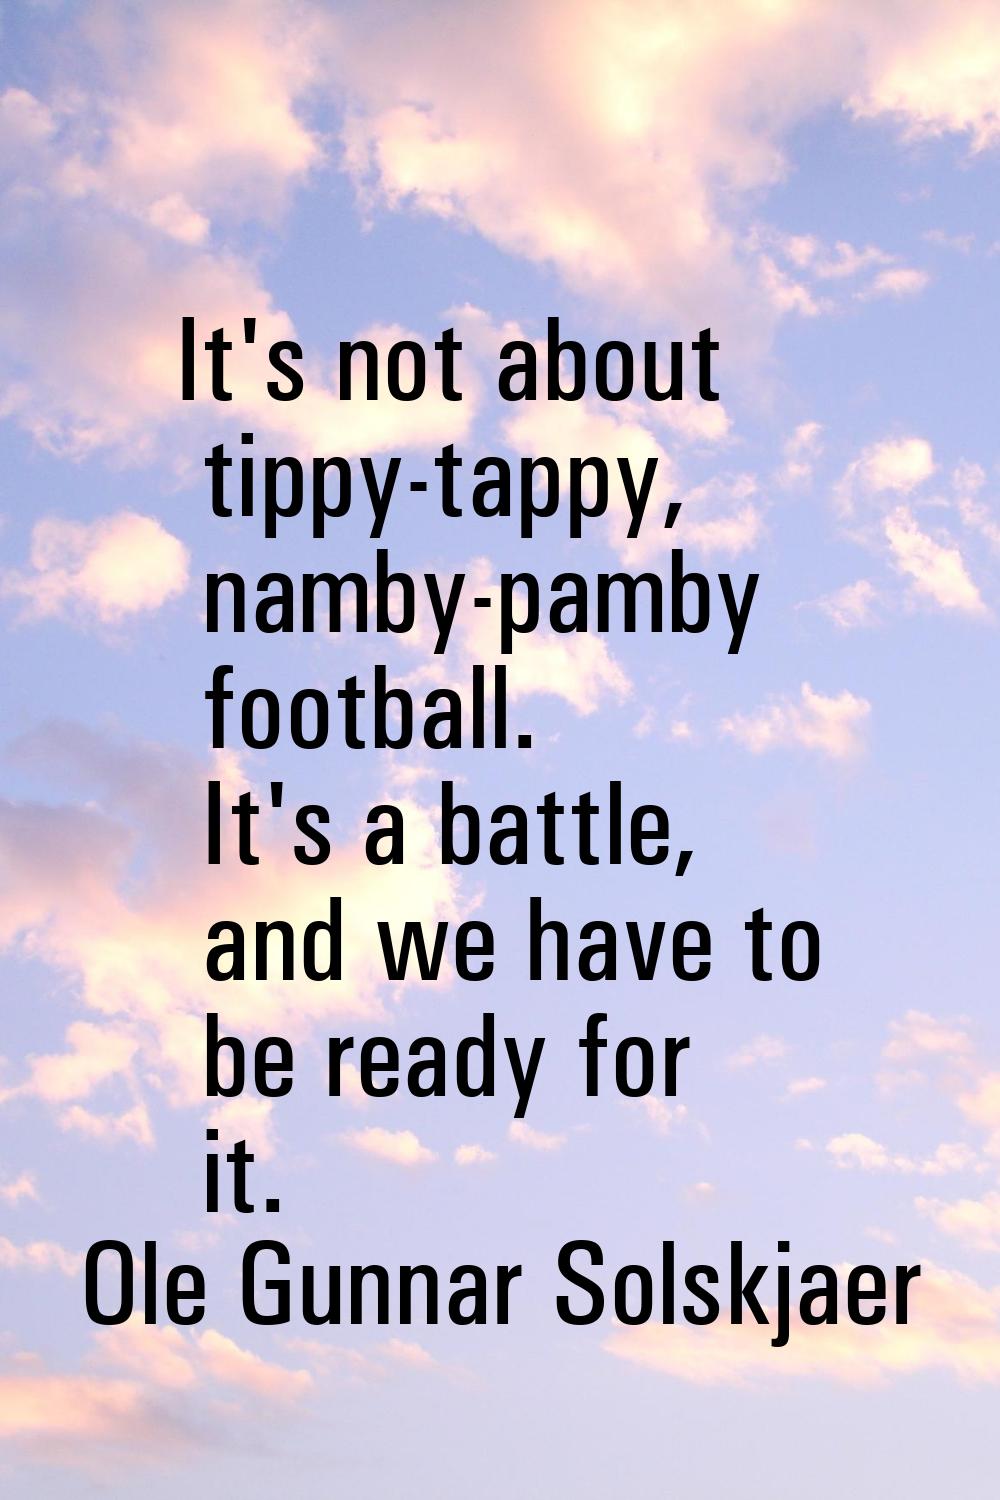 It's not about tippy-tappy, namby-pamby football. It's a battle, and we have to be ready for it.